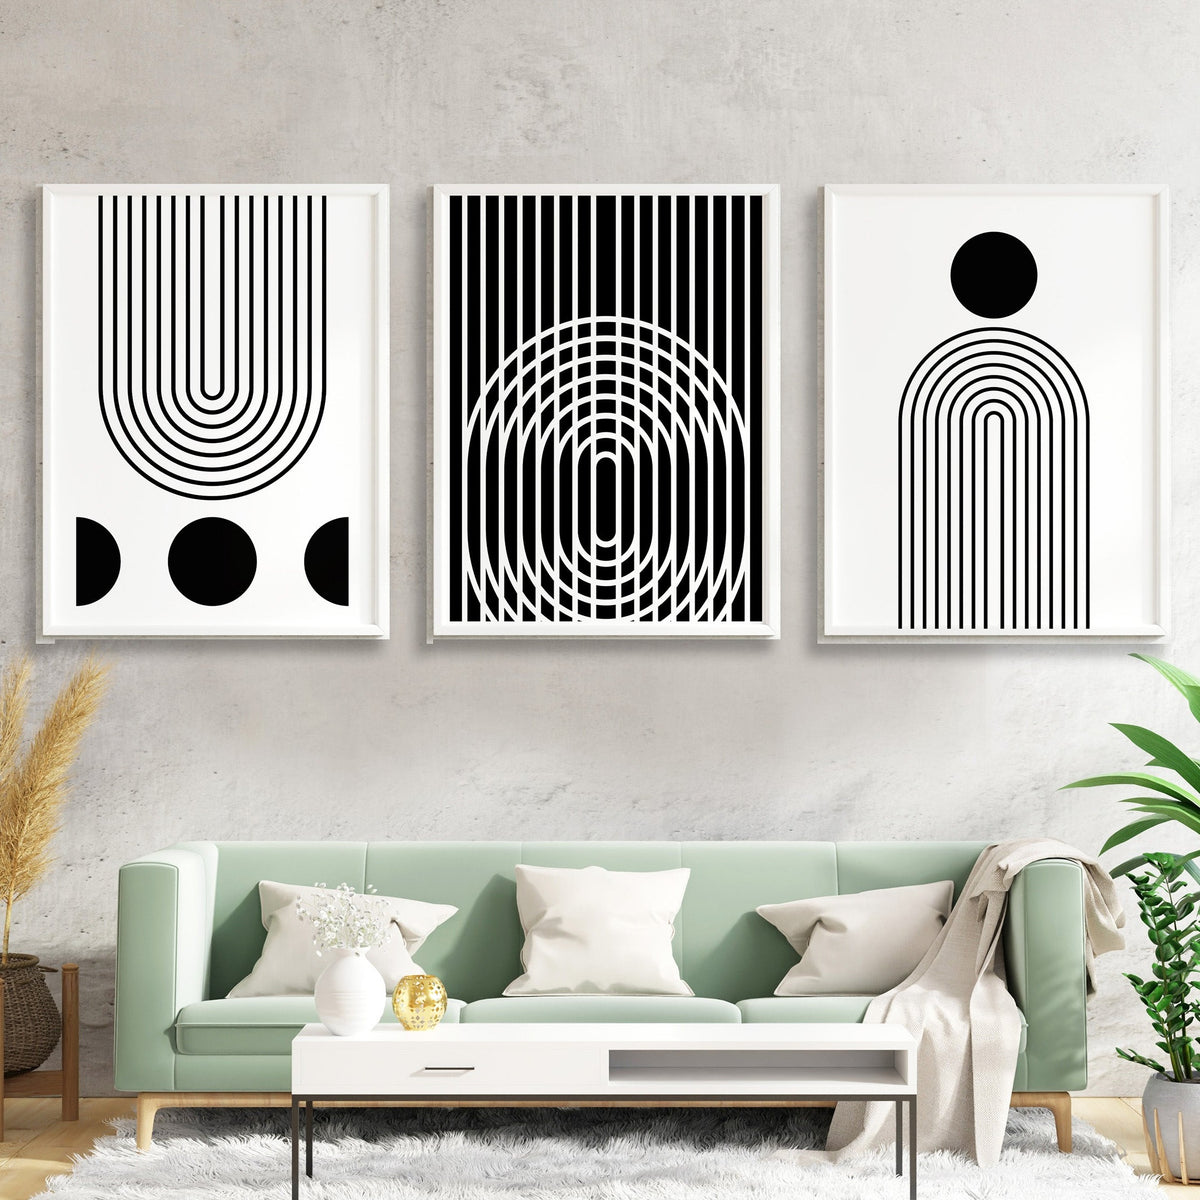 Black & White Rainbow, Sun & Moon Wall Poster Print Set Of 3 Wall Decor Posters A Moment Of Now Women’s Boutique Clothing Online Lifestyle Store